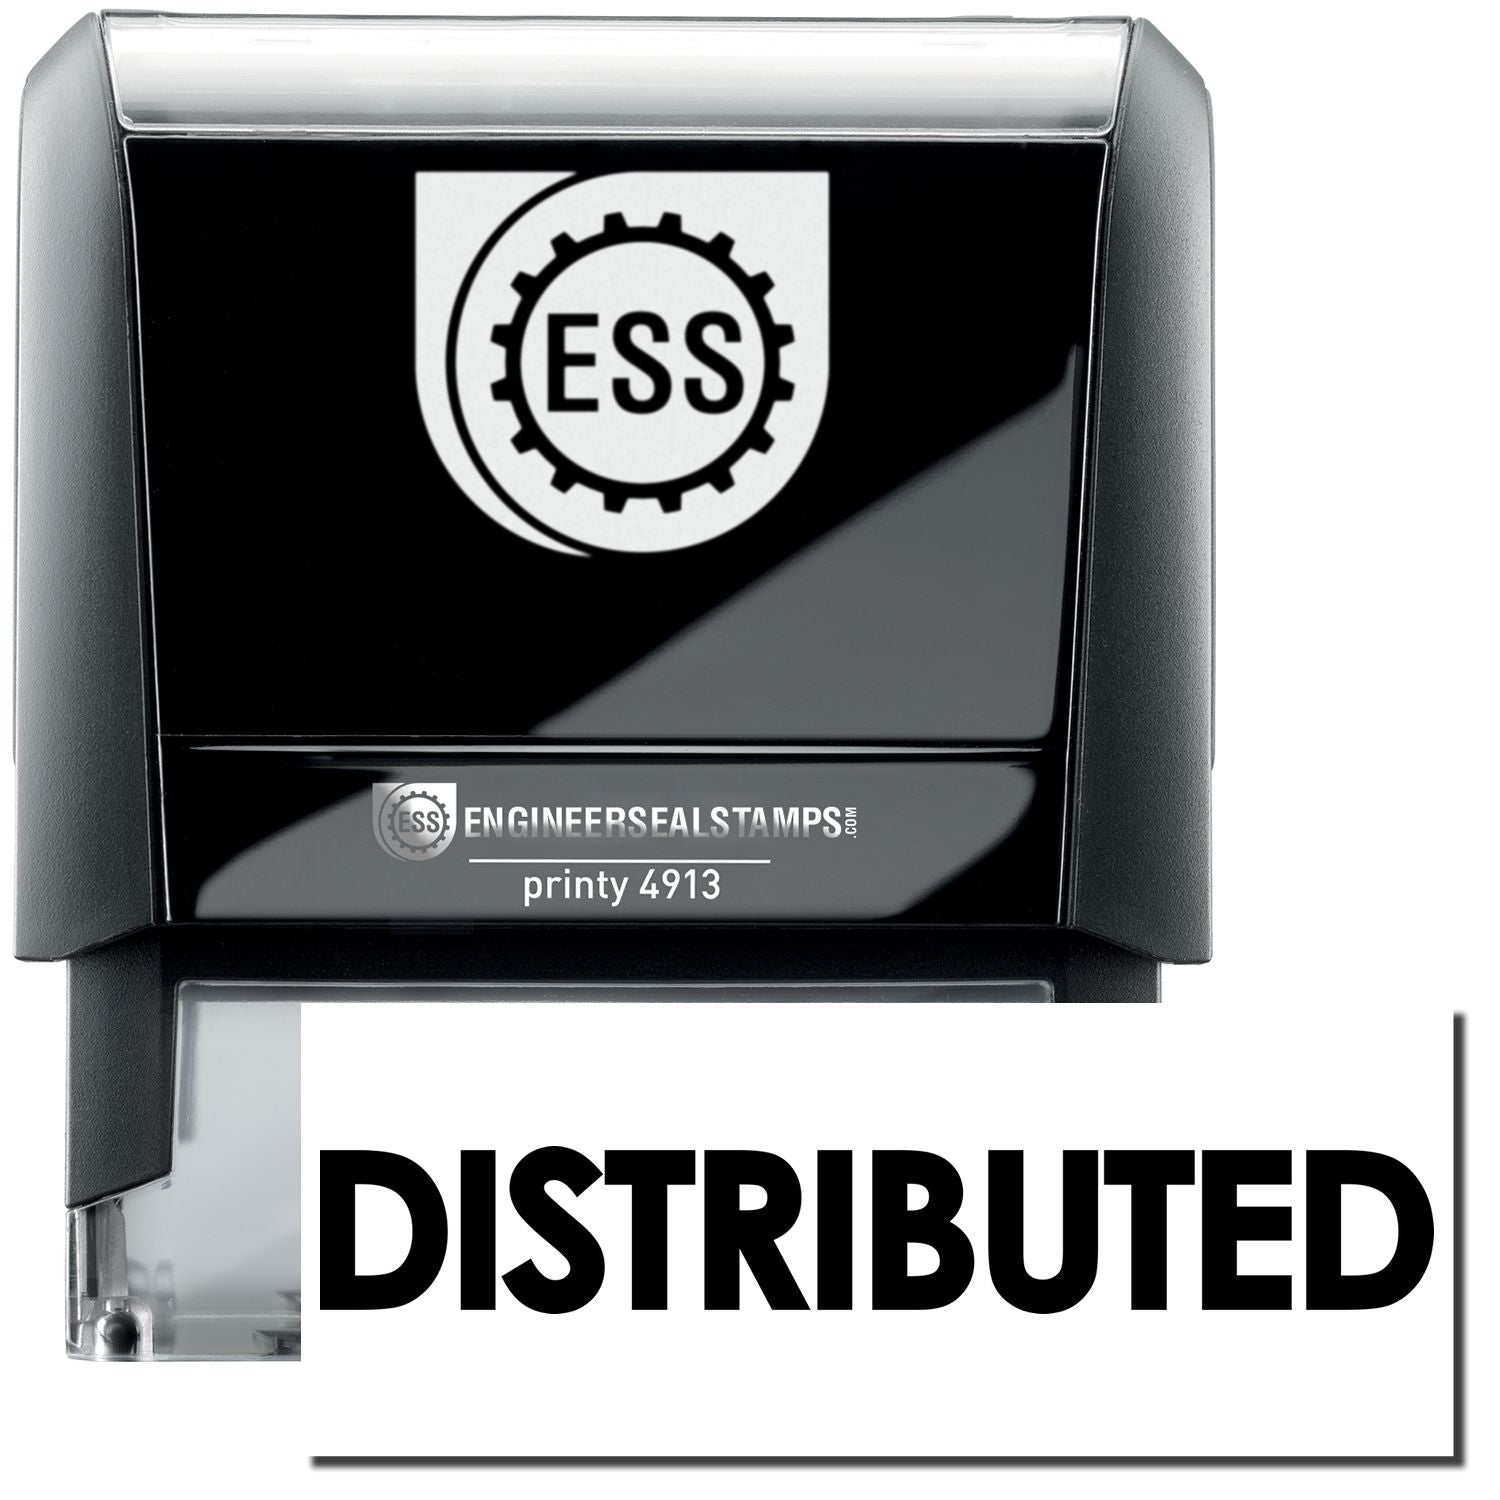 A self-inking stamp with a stamped image showing how the text "DISTRIBUTED" in large bold font is displayed by it after stamping.